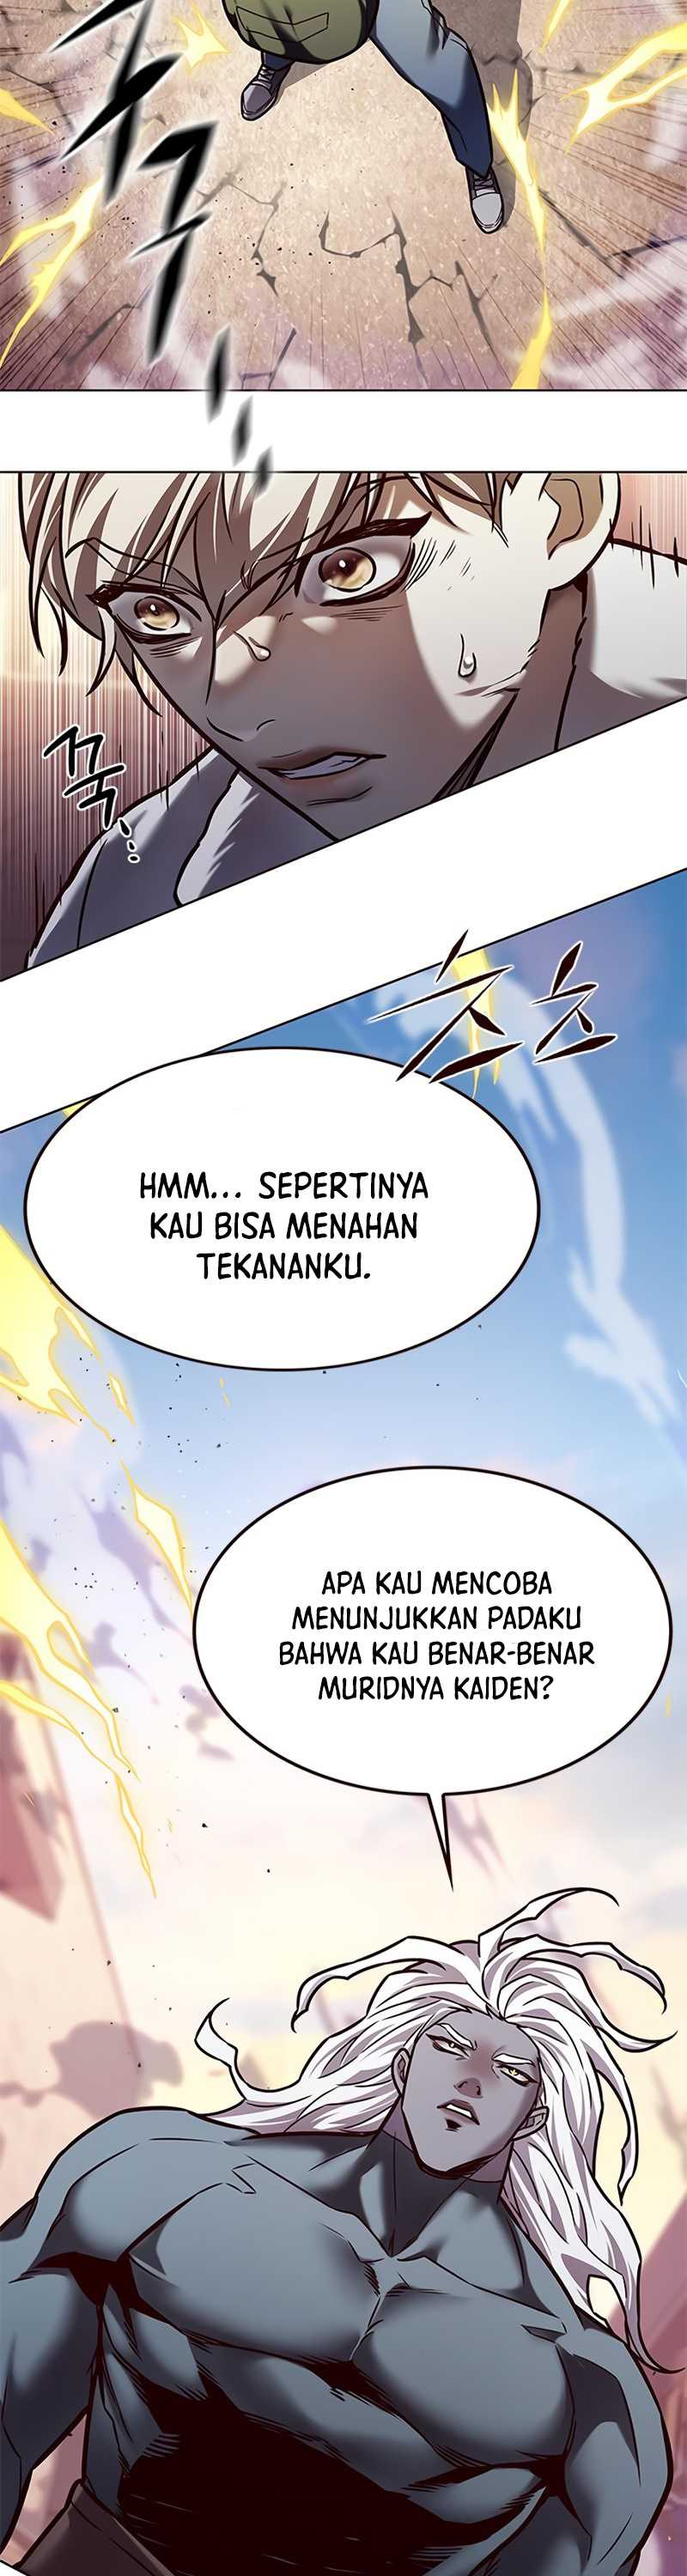 Eleceed Chapter 277